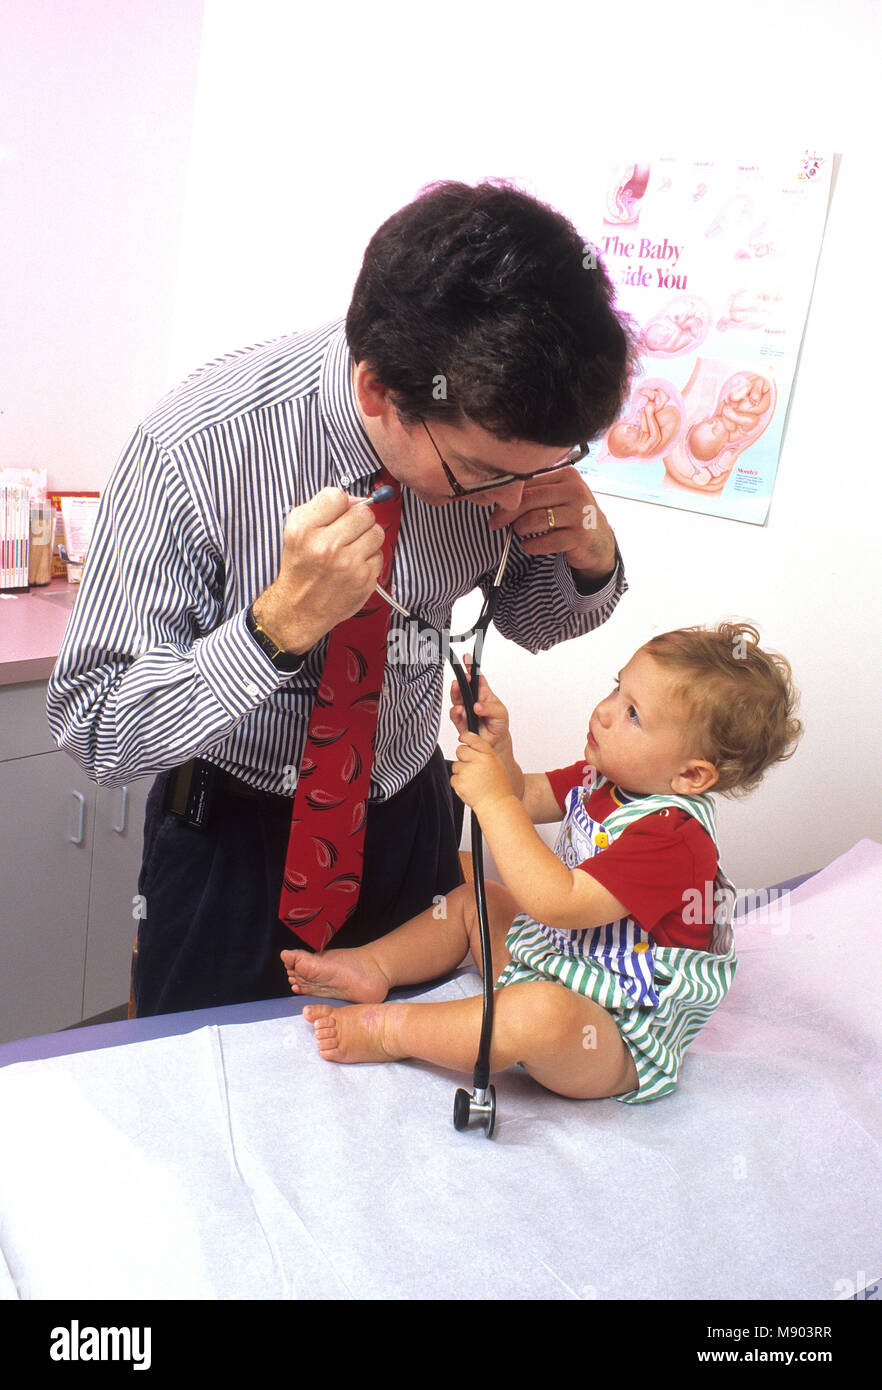 A pediatrician and his young patient Stock Photo